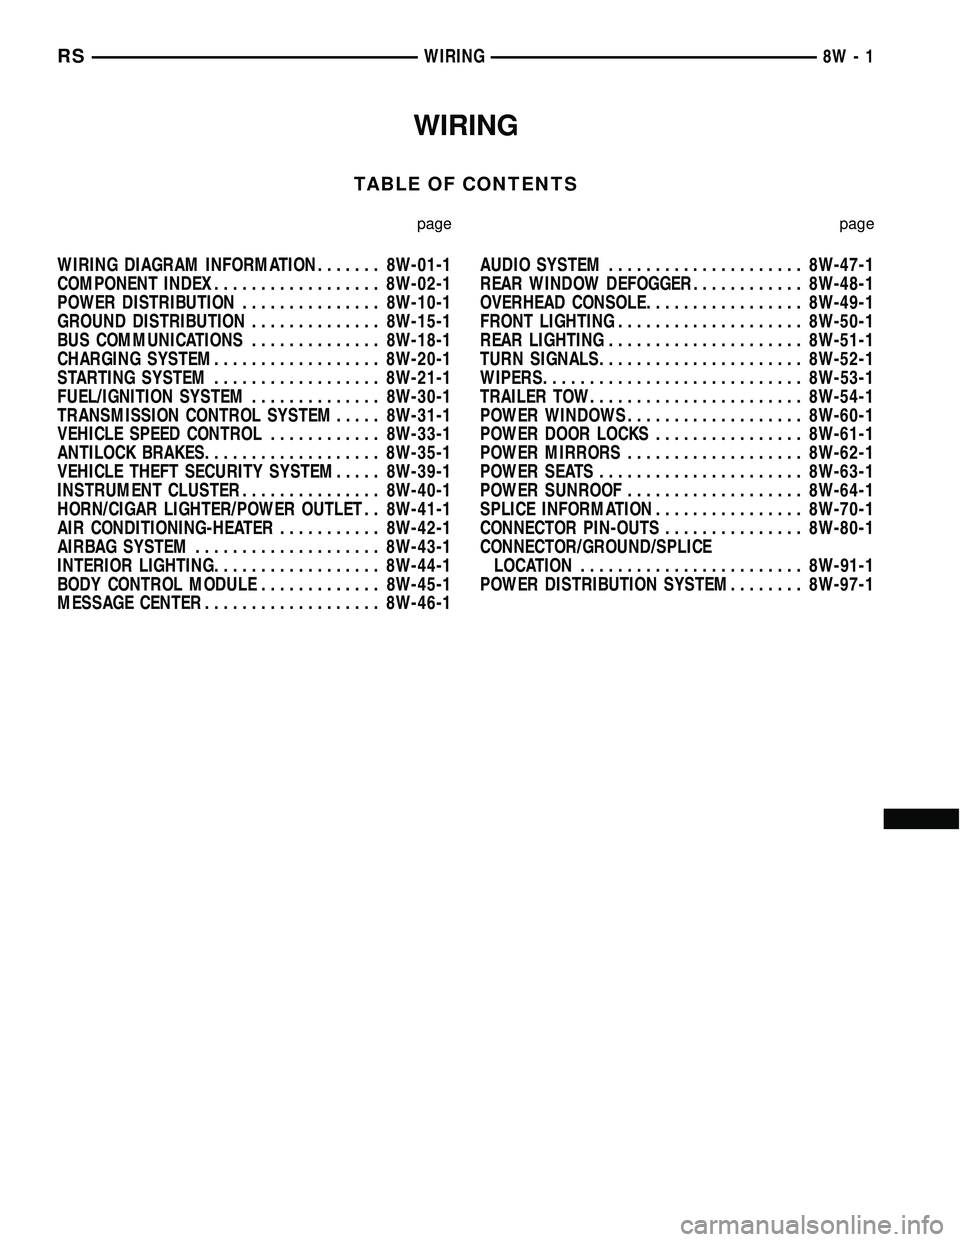 CHRYSLER VOYAGER 2004  Service Manual WIRING
TABLE OF CONTENTS
page page
WIRING DIAGRAM INFORMATION....... 8W-01-1
COMPONENT INDEX.................. 8W-02-1
POWER DISTRIBUTION............... 8W-10-1
GROUND DISTRIBUTION.............. 8W-15